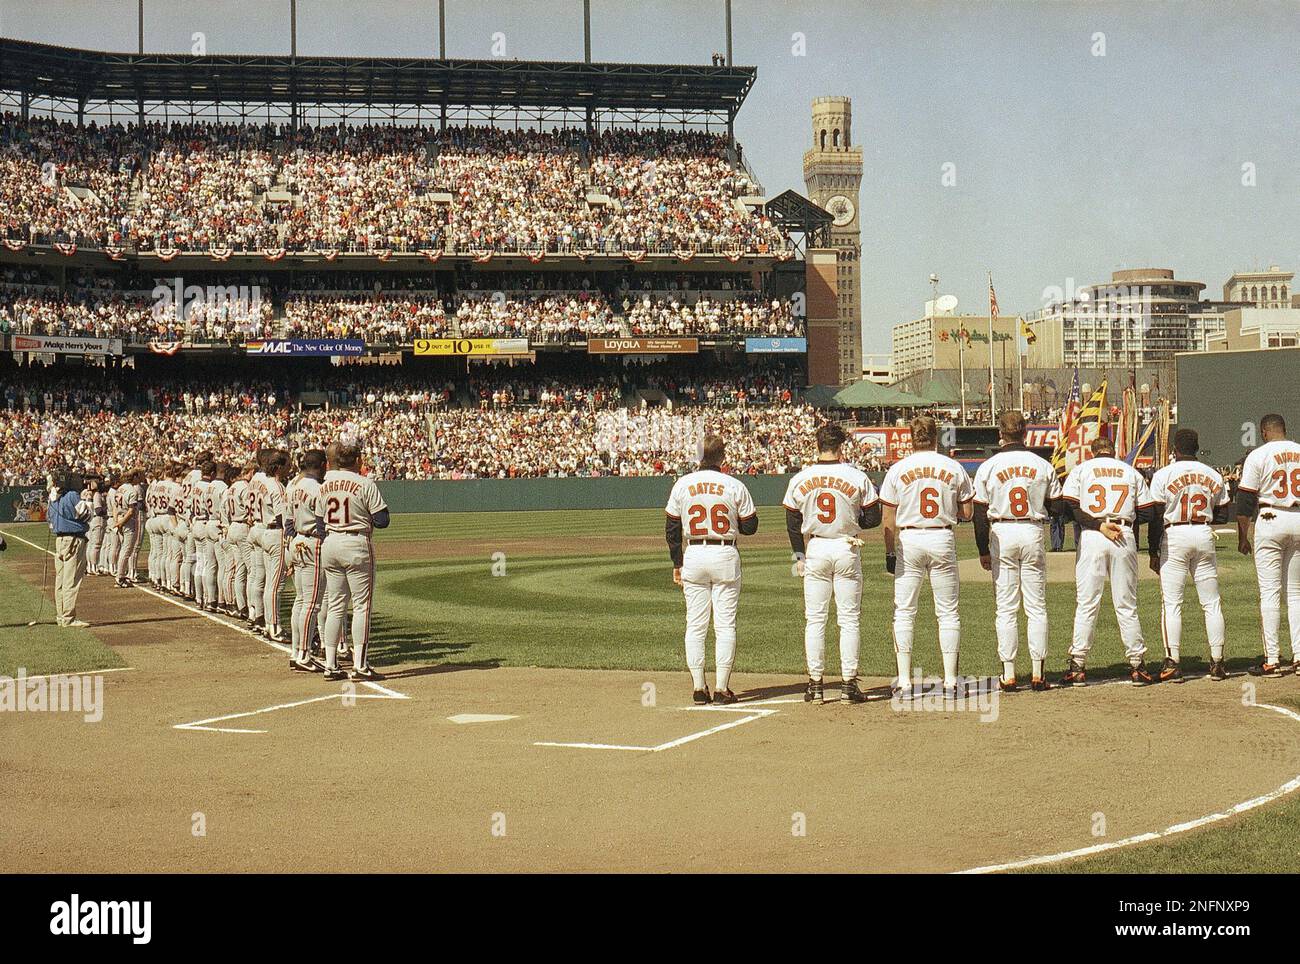 Players stand during opening game at new Camden Yards April 6